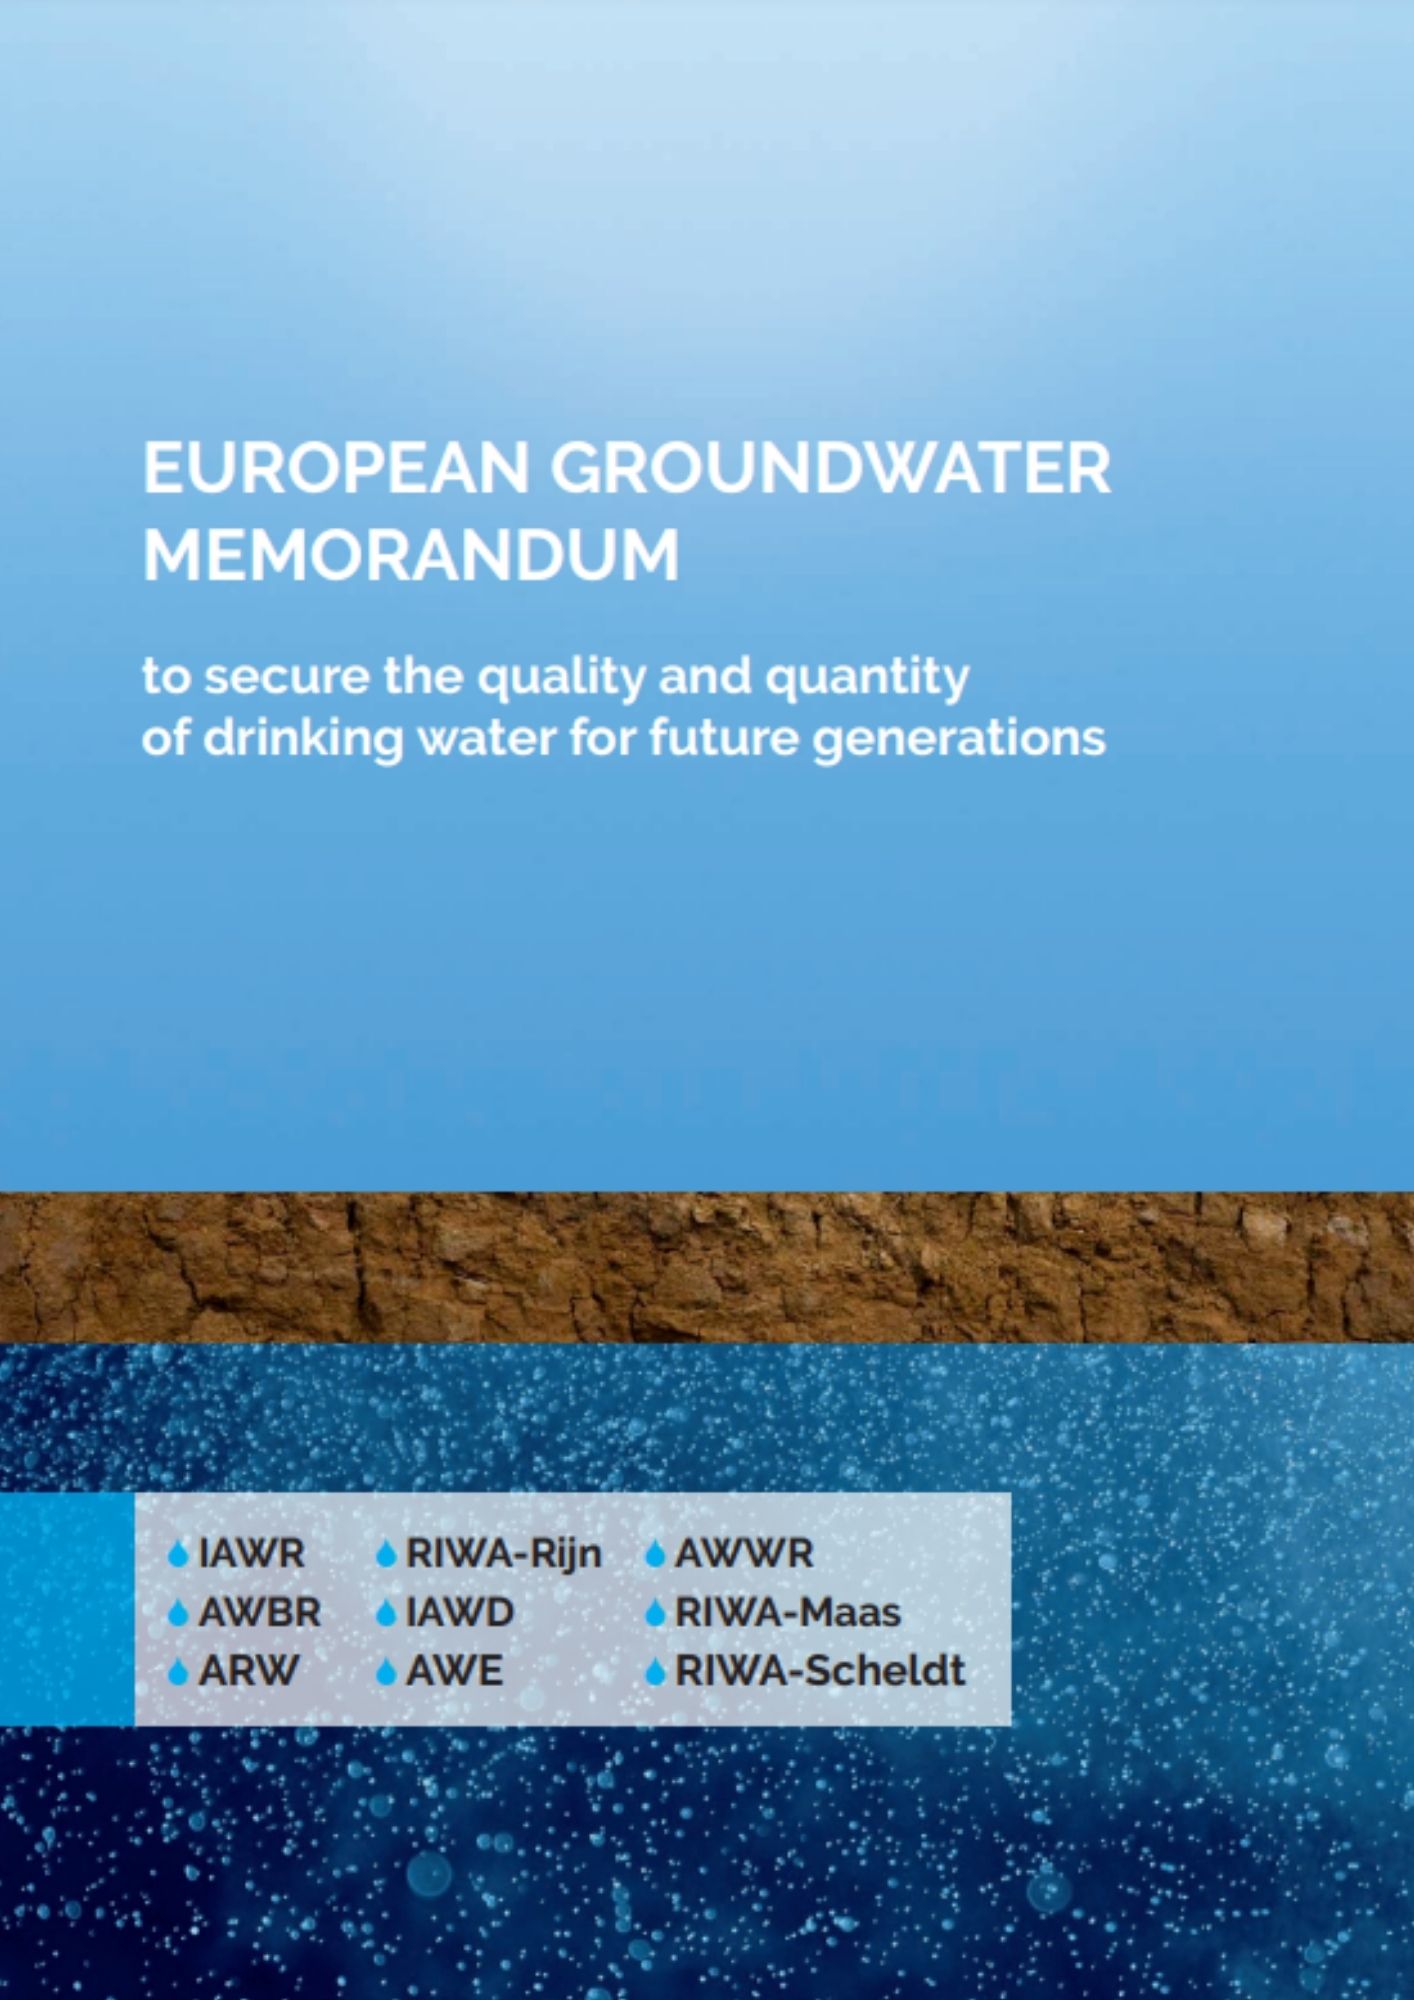 European Groundwater Memorandum to secure the quality and quantity of drinking water for future generations